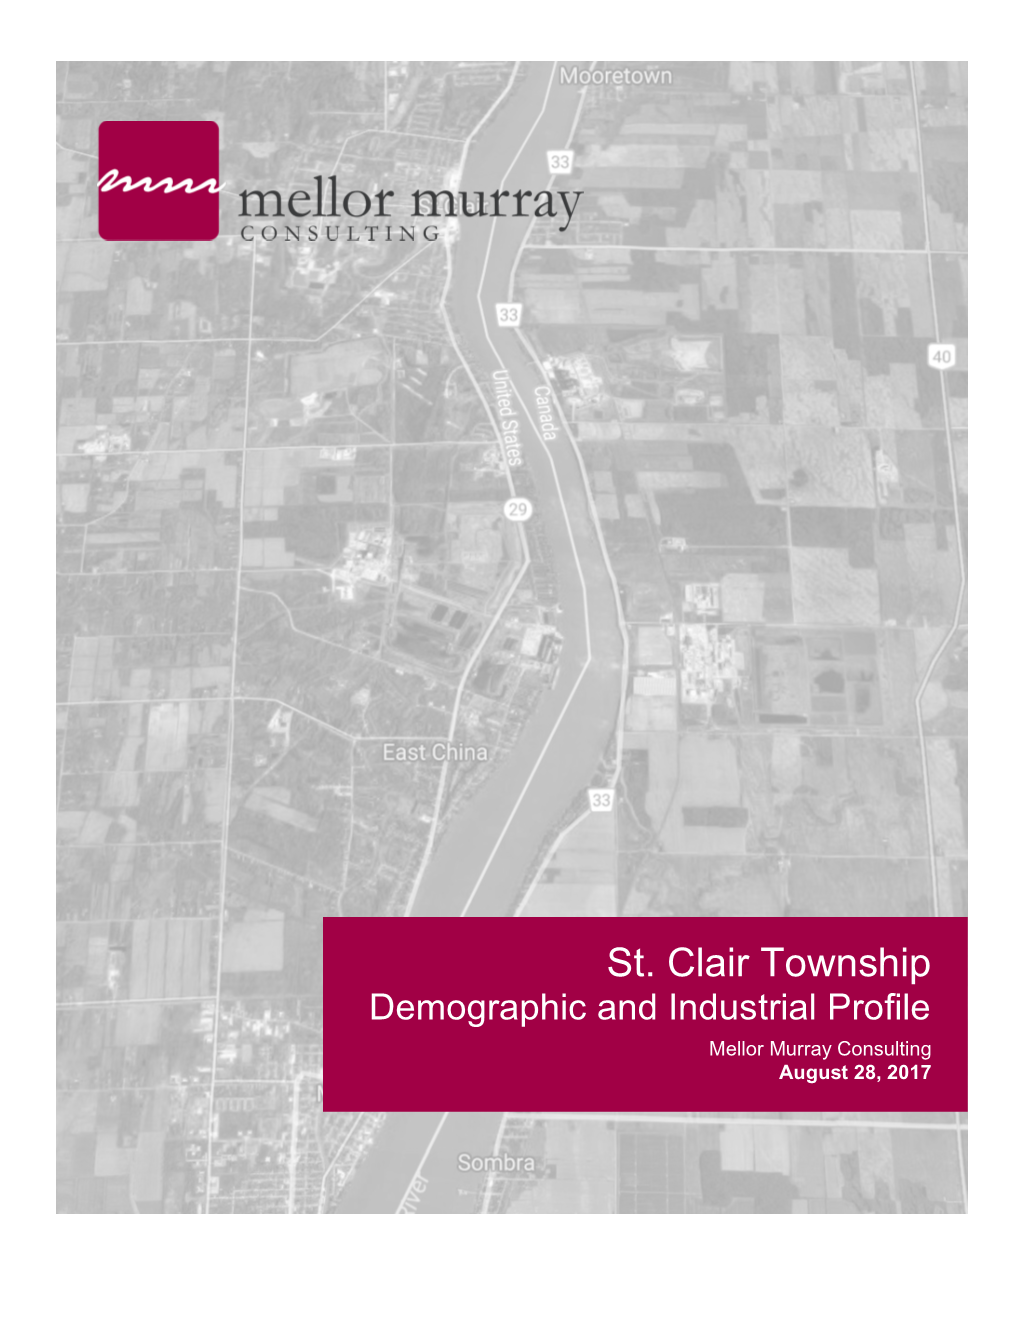 St. Clair Township Demographic and Industrial Profile Mellor Murray Consulting August 28, 2017